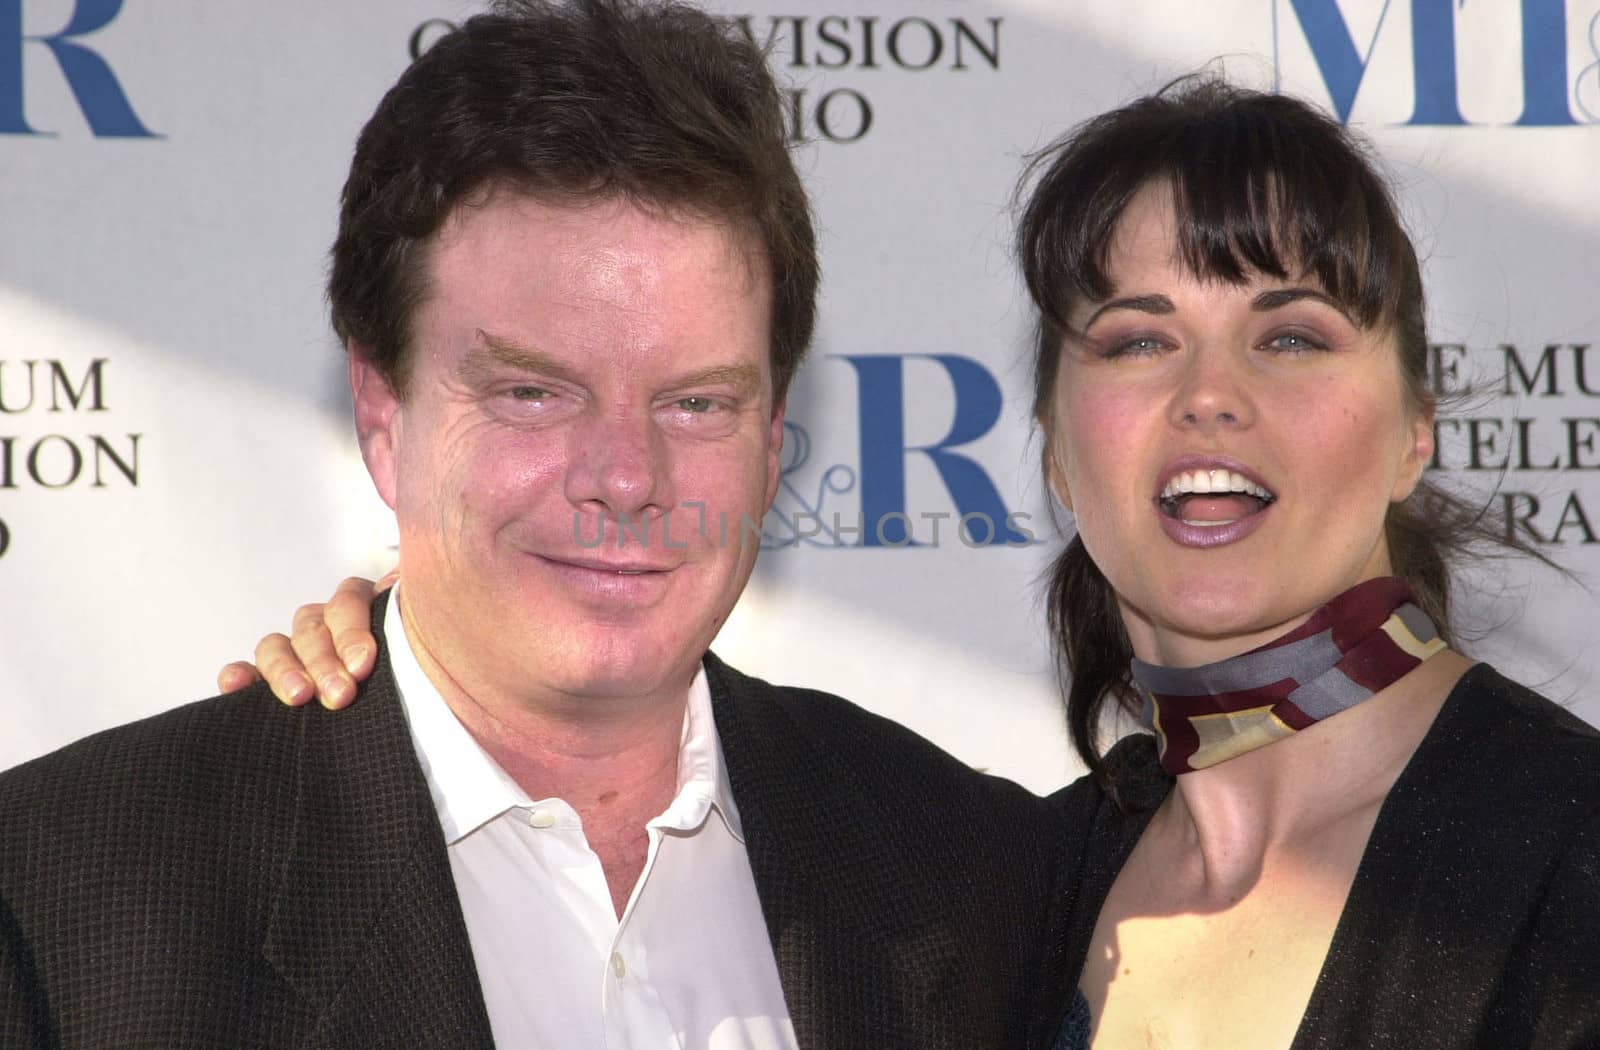 Robert Tapert, Lucy Lawless at trhe viewing party for the final episode of "Xena: Warrior Princess," Museum of Television and Radio, Beverly Hills, 06-19-01